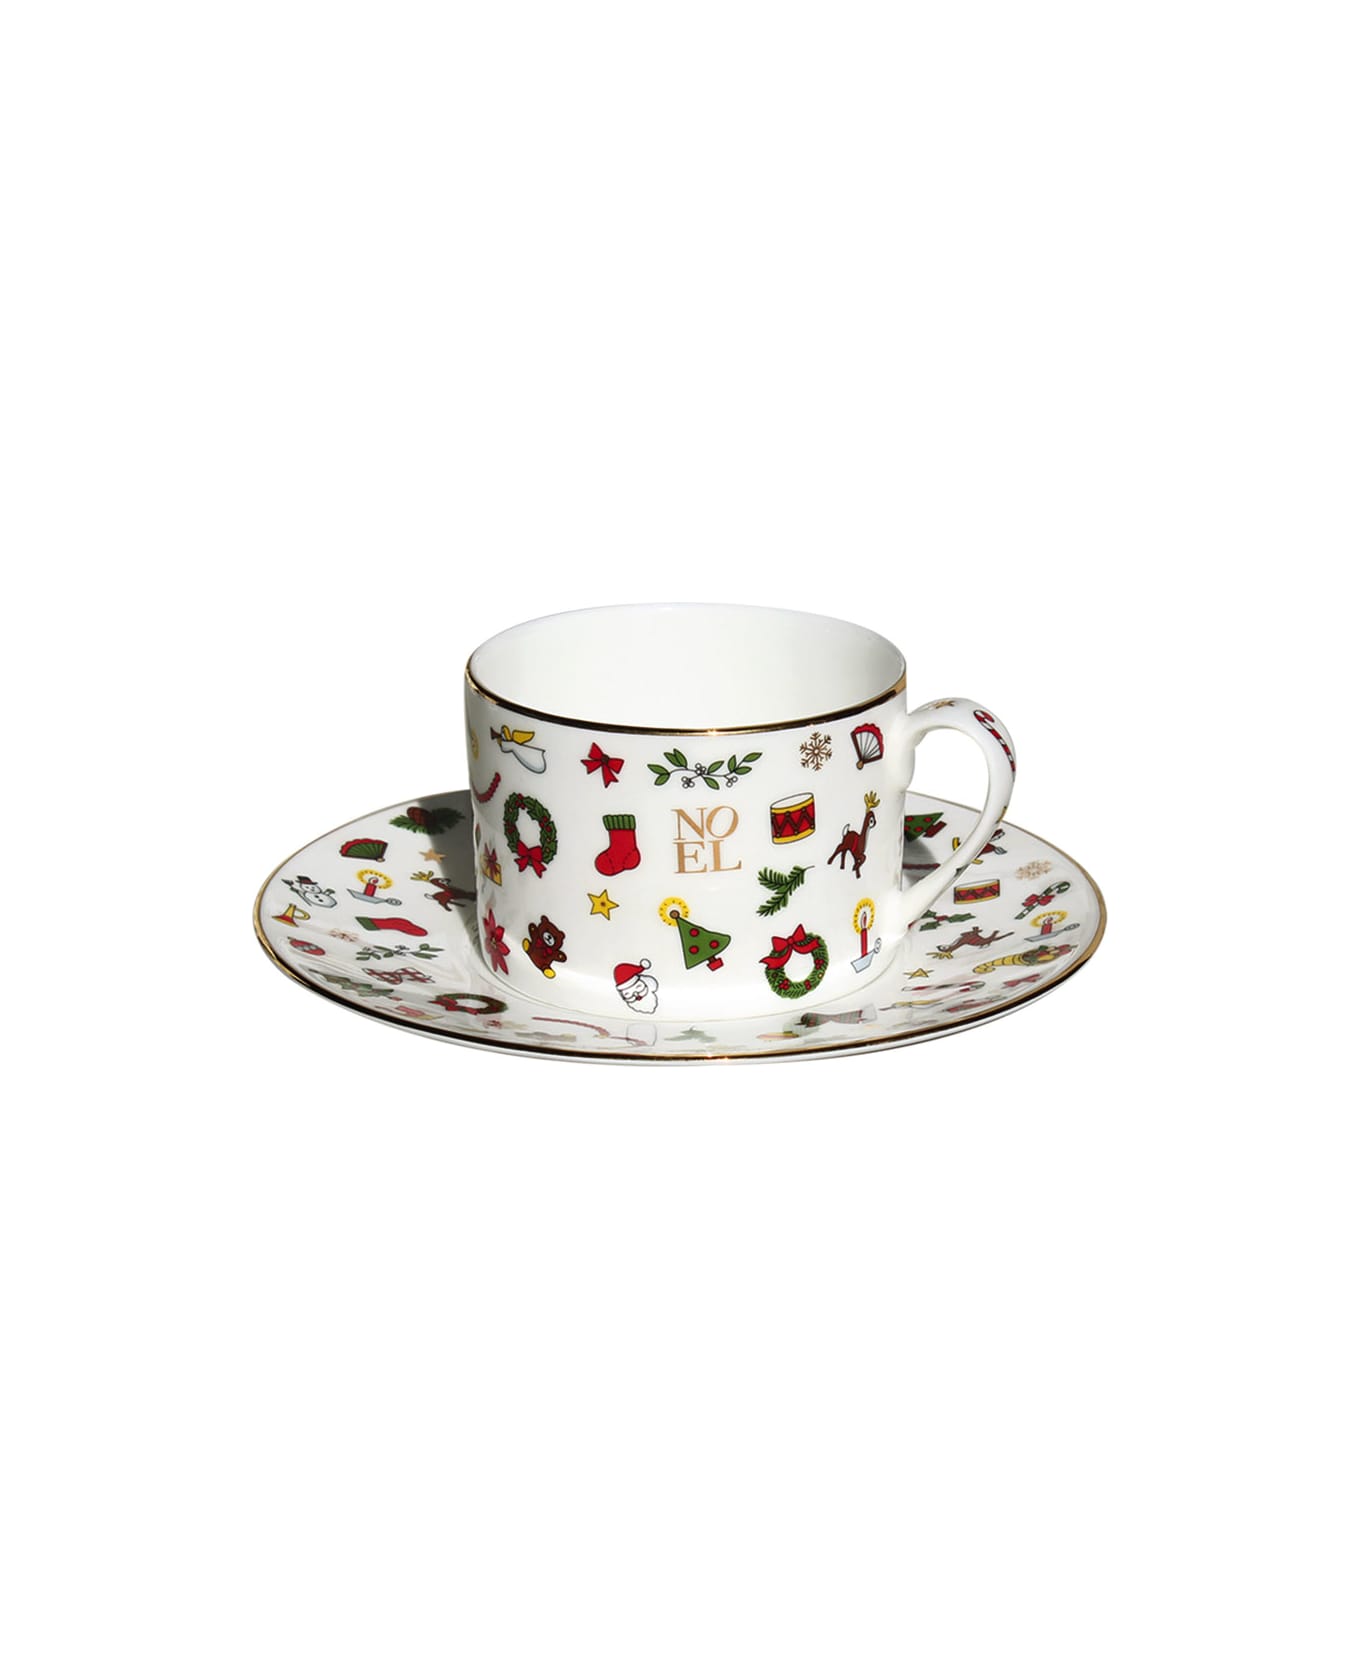 Taitù Set of 2 Tea/Coffee Cups & Saucers - Noel Oro Collection - Multicolor and Gold